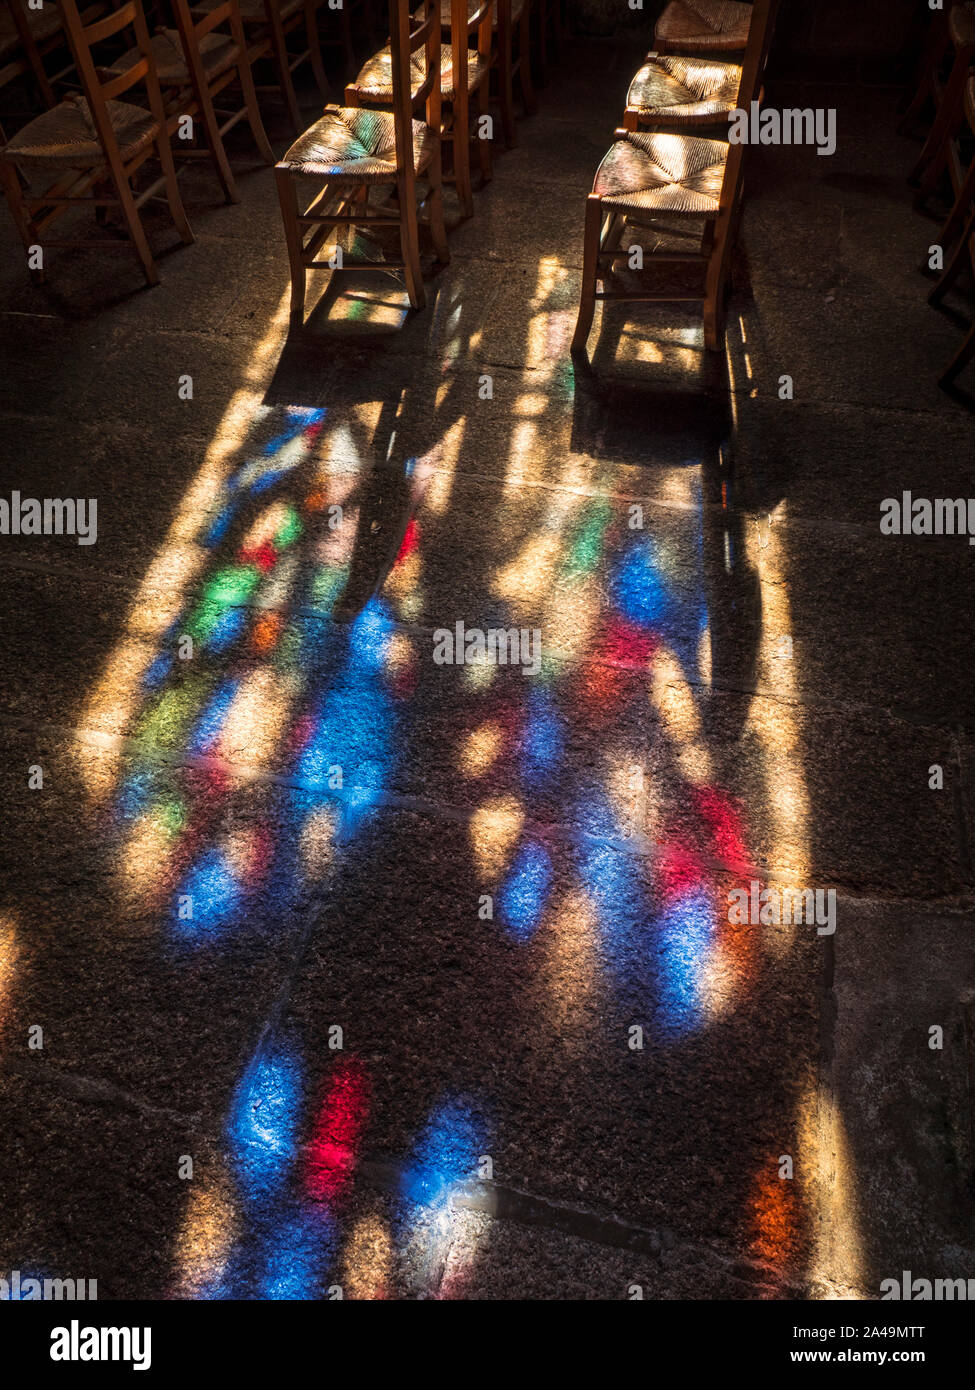 Faith contemplation Church stain glass window colourful late afternoon sunset light window pattern projected on to church chairs pews and flag stone floor in peaceful contemplative faith religious environment Stock Photo